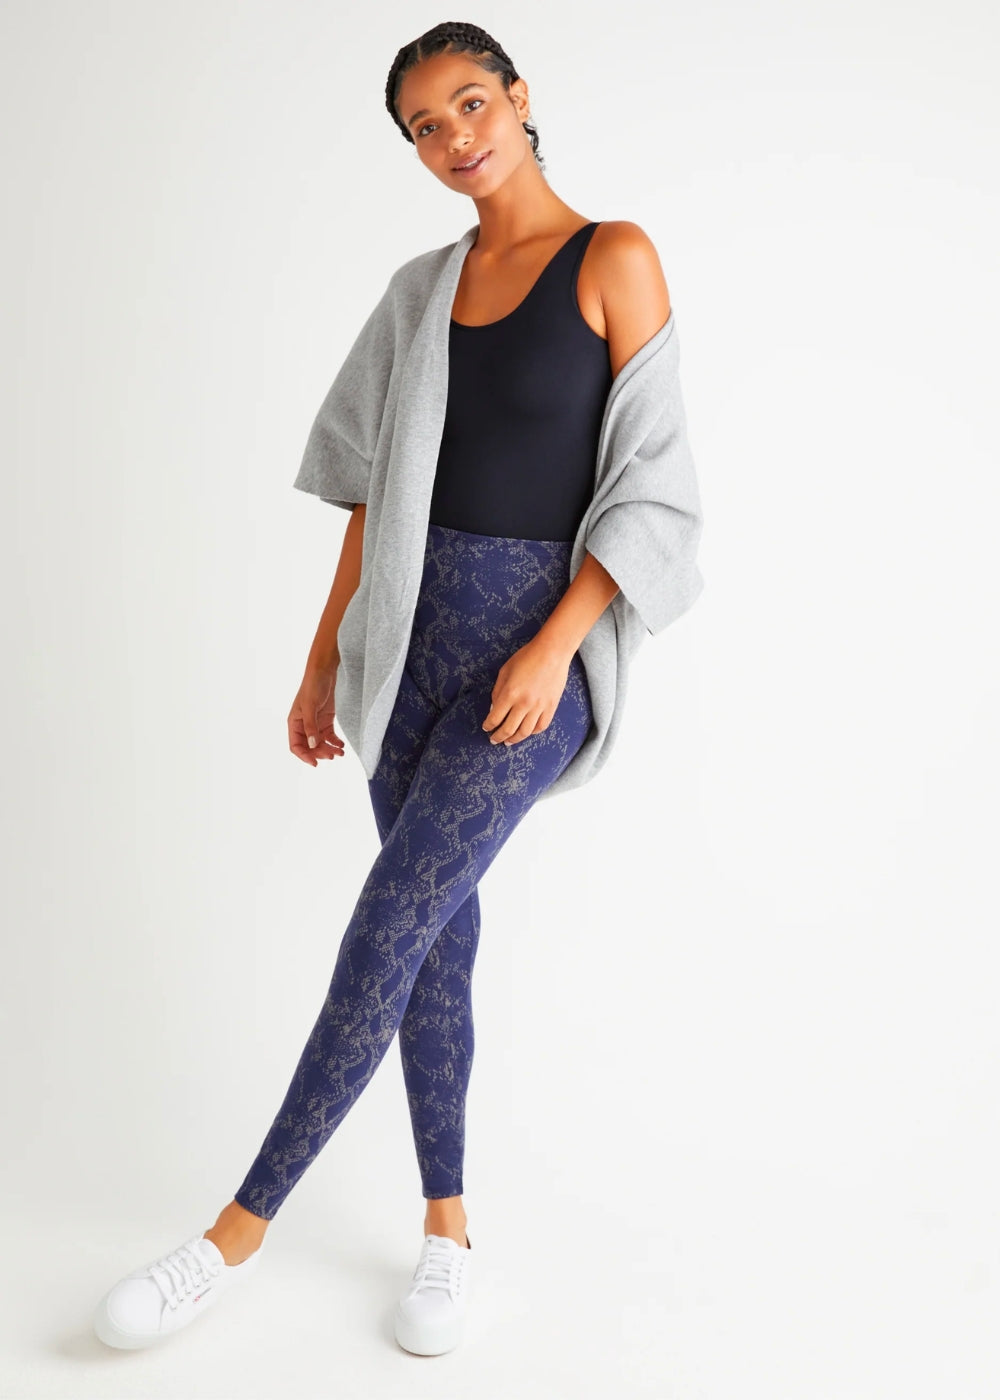 Clothing & Shoes - Bottoms - Leggings - Yummie Rachel Legging With Stripe  And Mesh Pocket - Online Shopping for Canadians